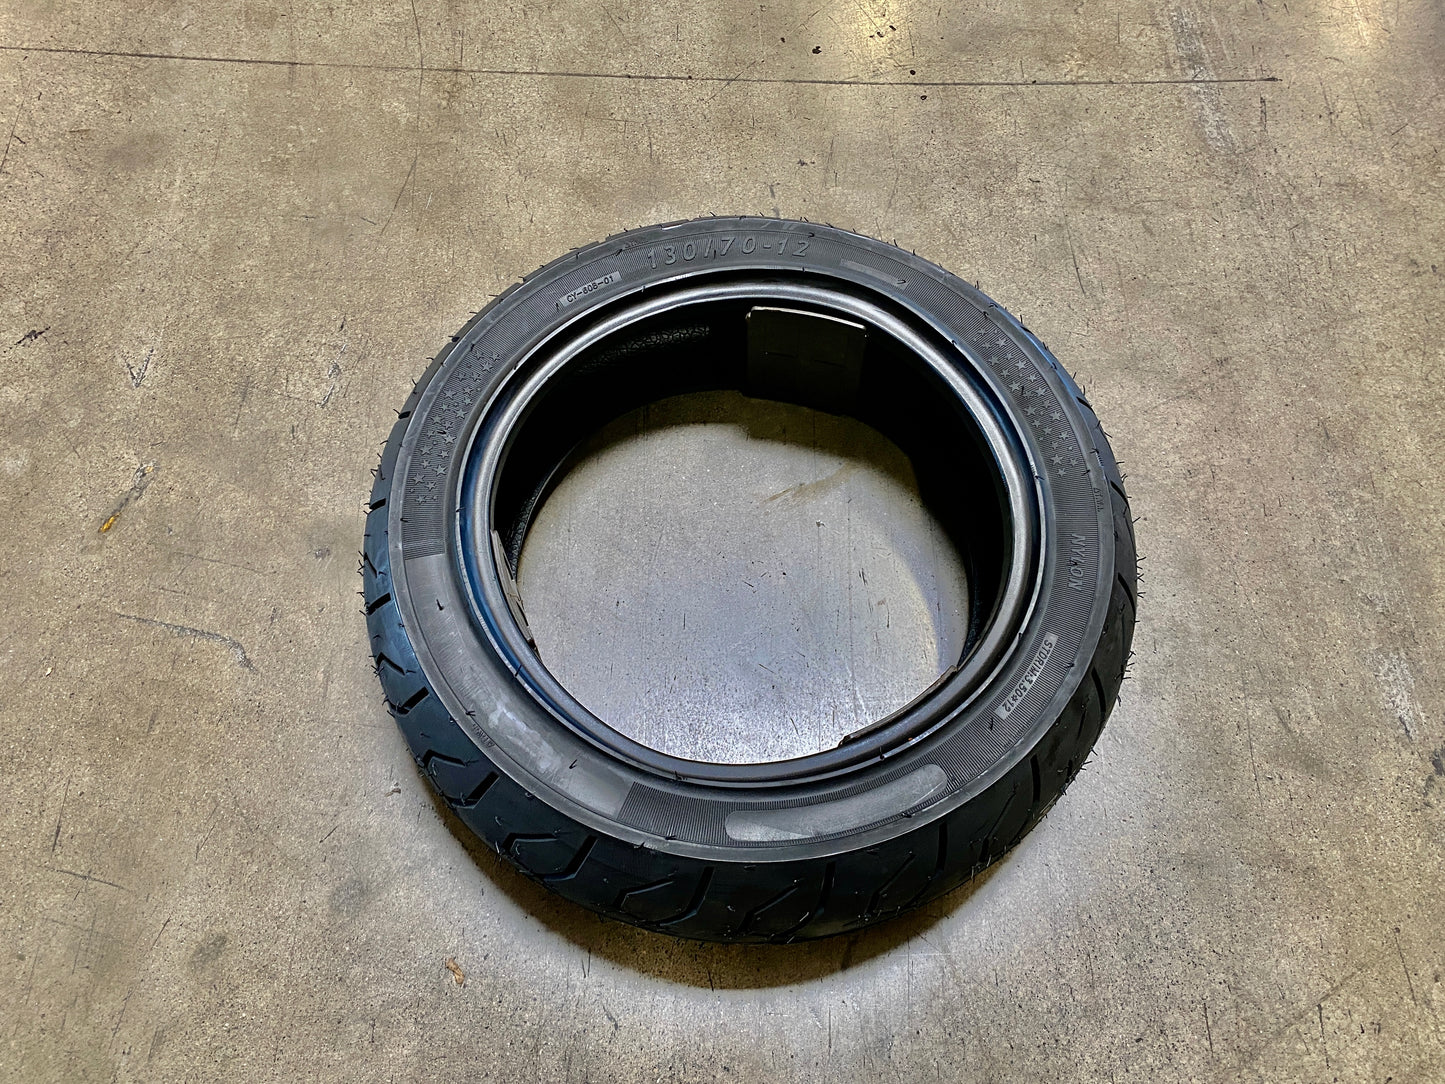 130/70-12 rear tire for sale online. Tire size 130/70-12